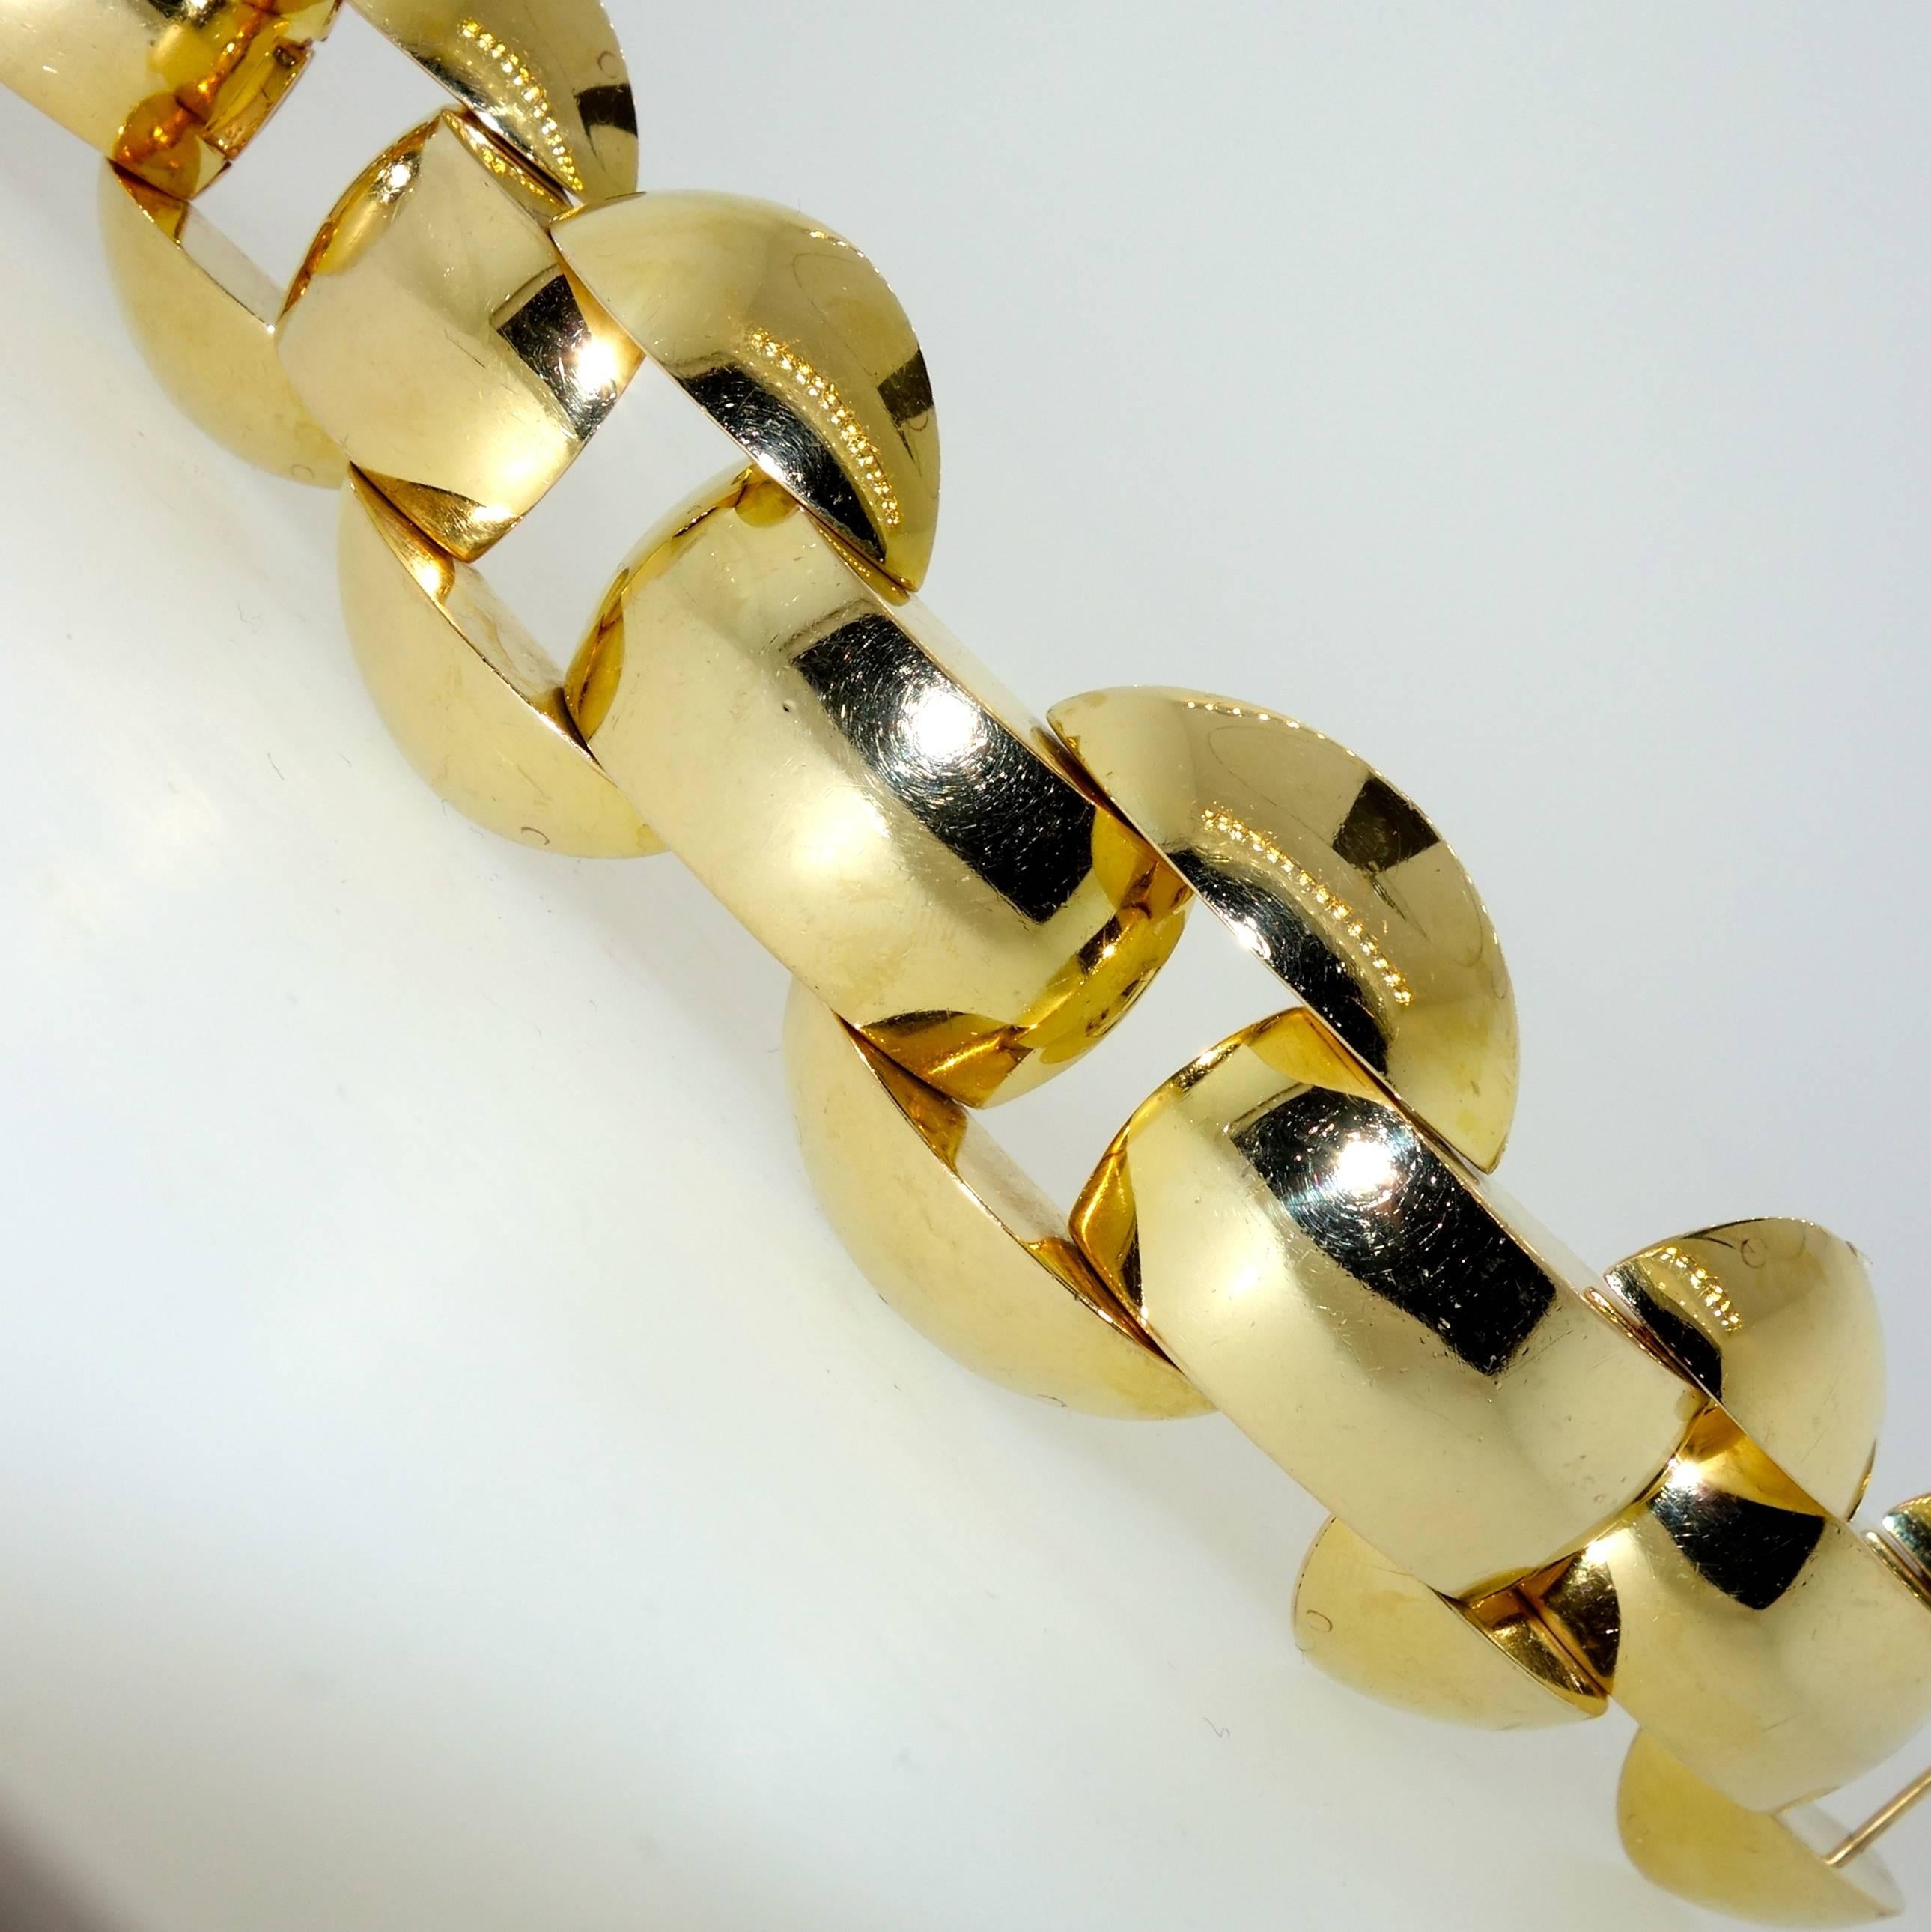 Bold gold bracelet, striking American retro design, this heavy link bracelet is 7.5 inches long, 1.5 inches wide and weighs 98.77 grams.